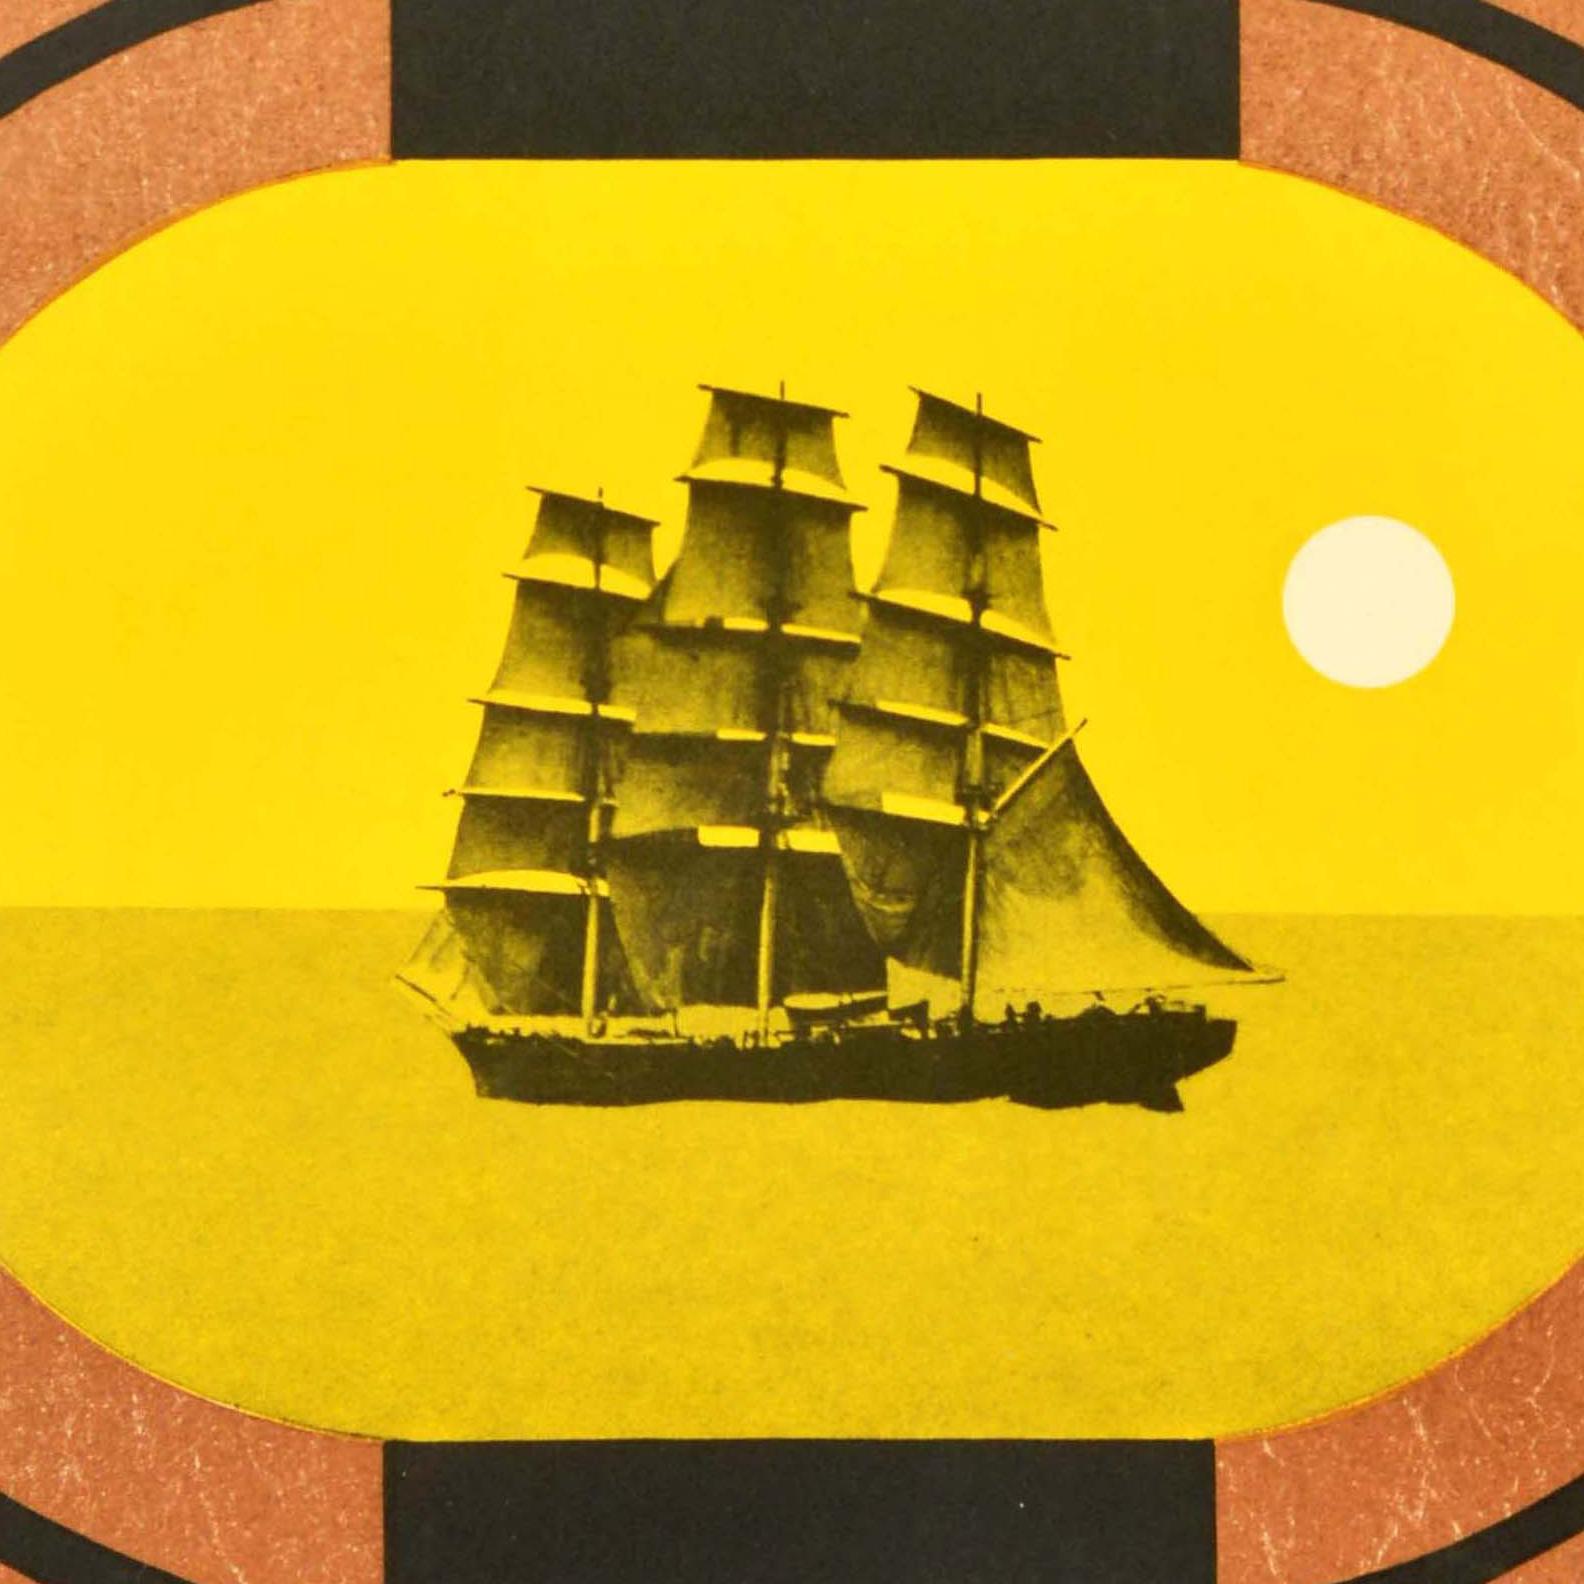 Original vintage London Transport poster advertising the historic Cutty Sark museum ship in Greenwich featuring a great design by the notable artist Tom Eckersley (1914-1997) depicting the iconic tea clipper in full sail against a yellow background